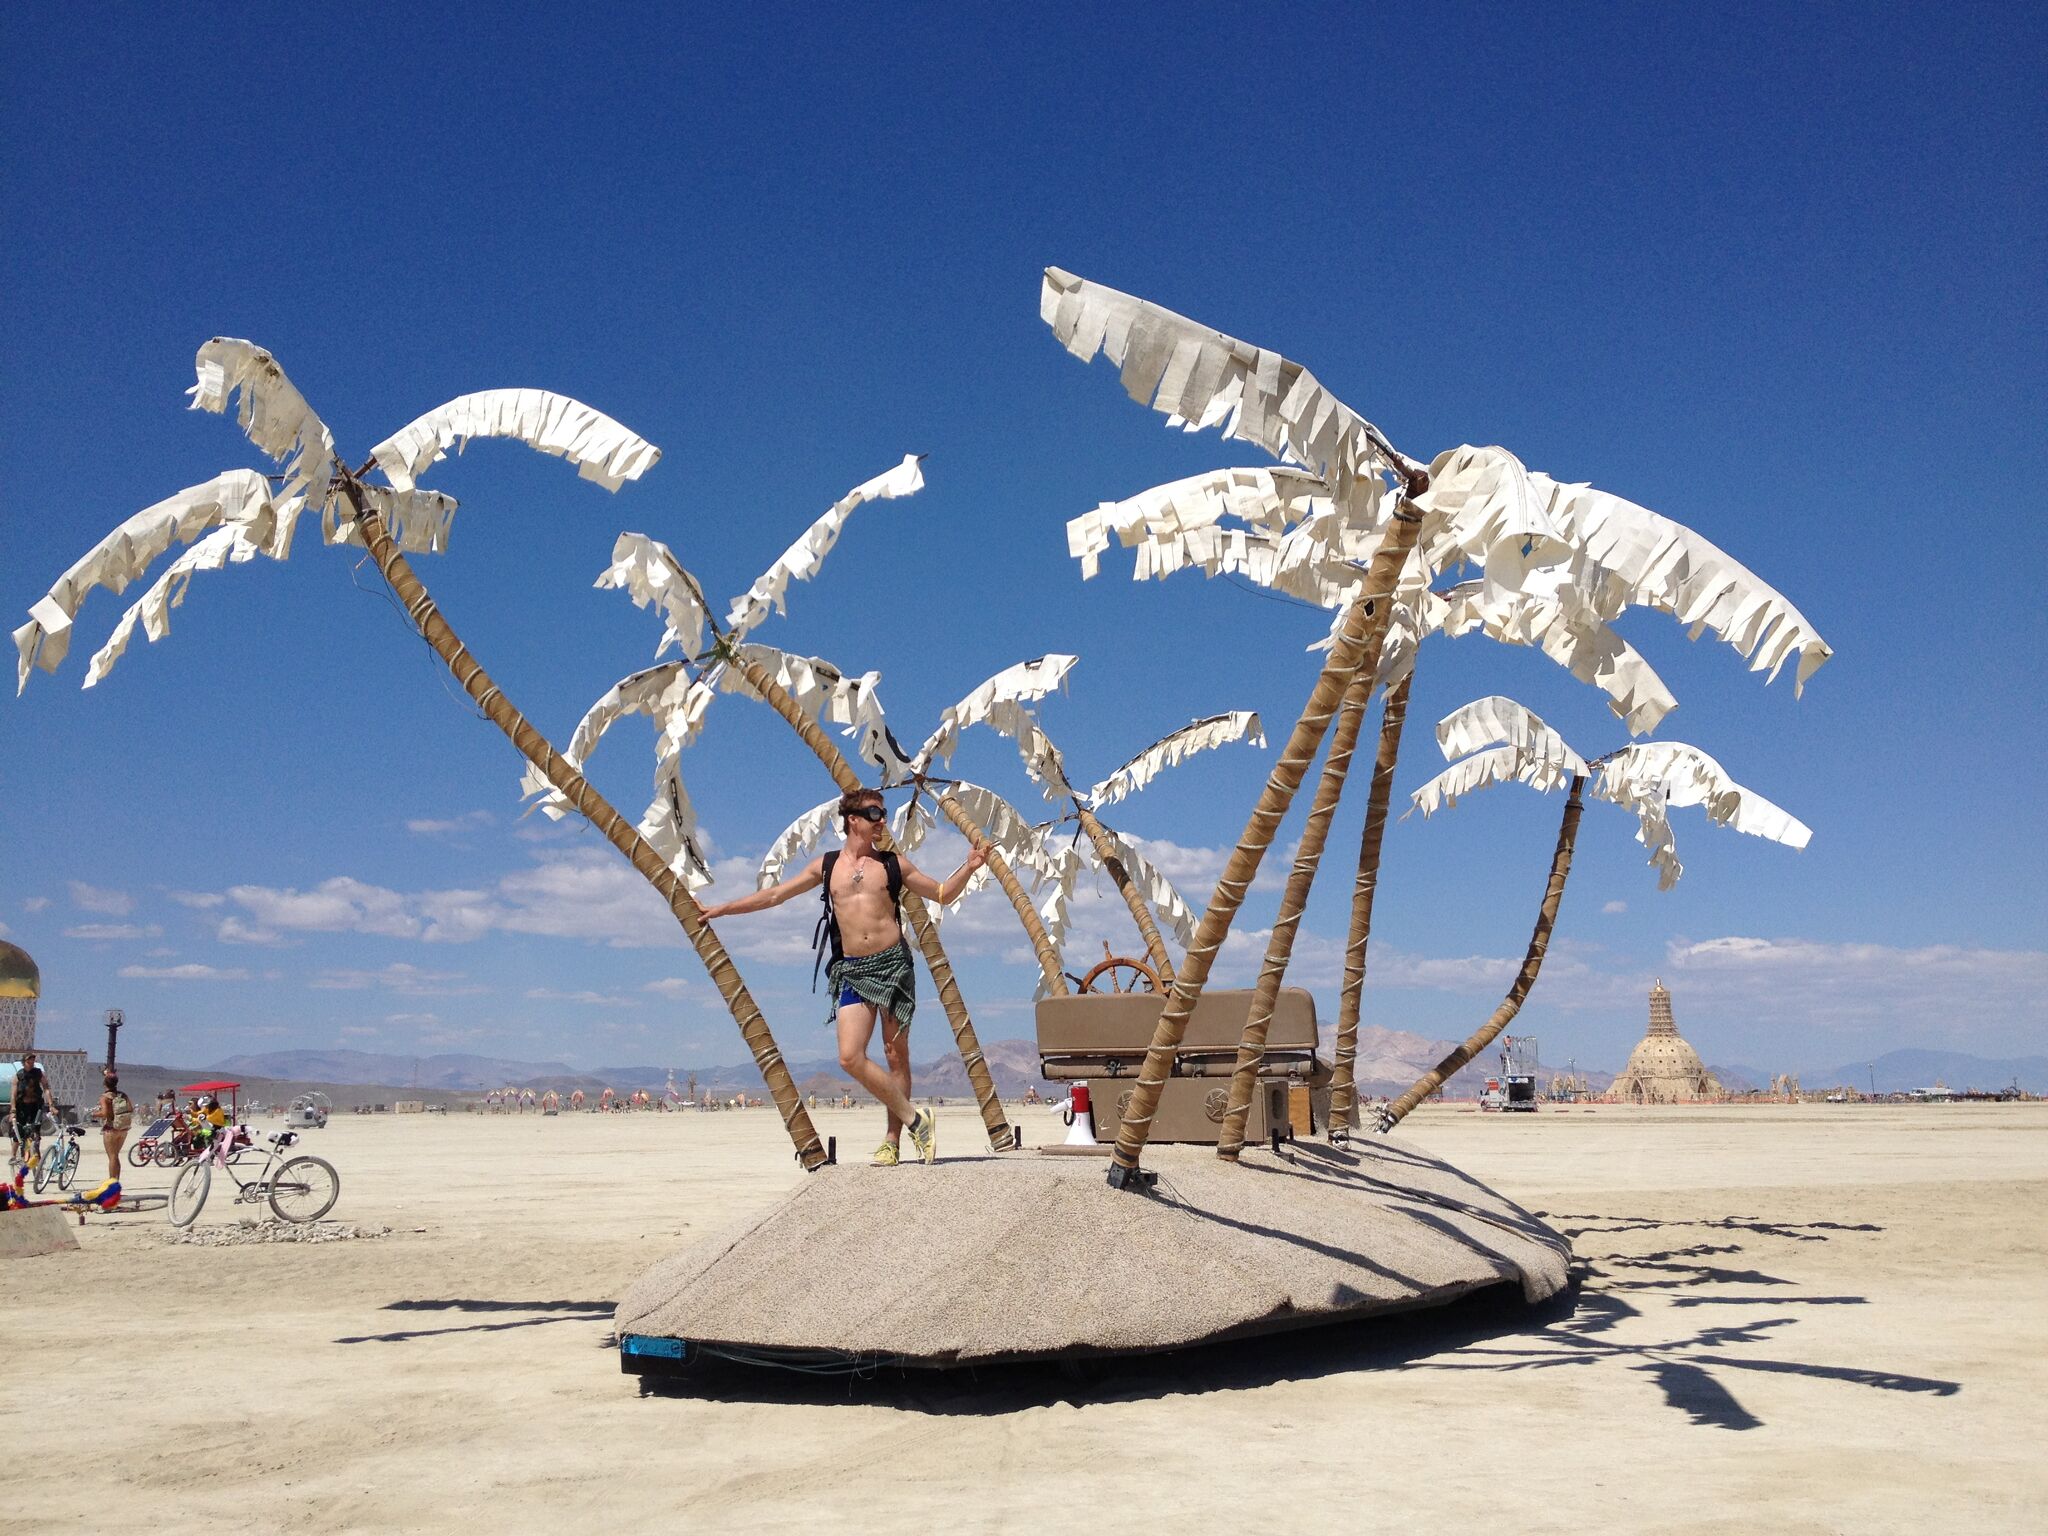 Burning Man All to know about the eccentric desert event